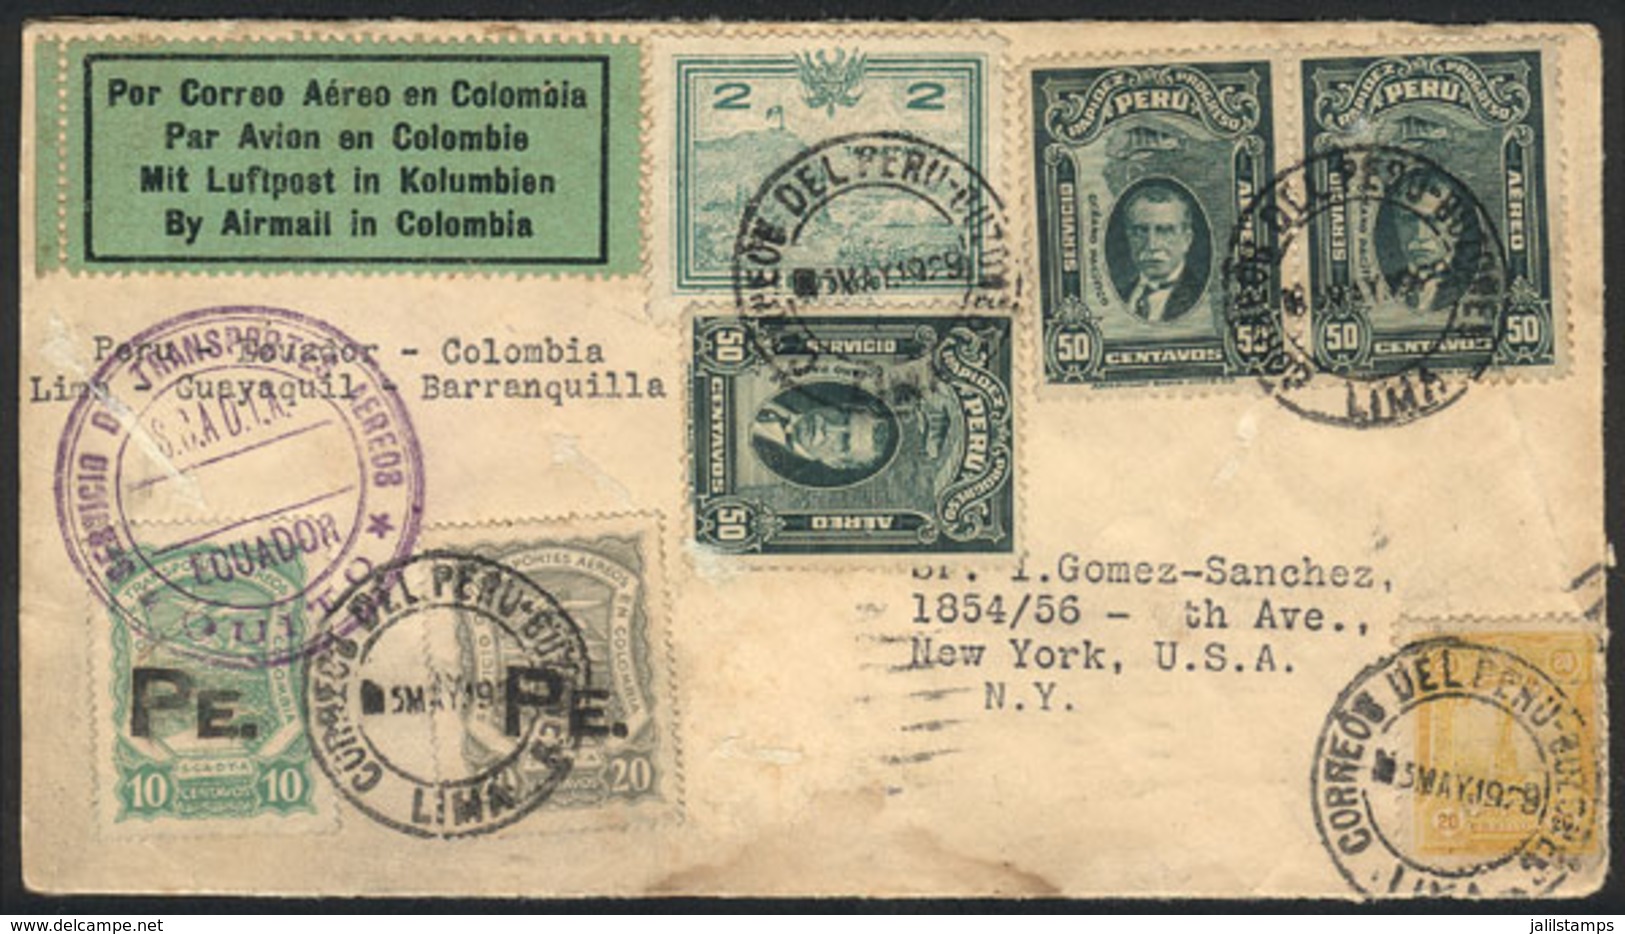 PERU: 3/MAY/1929 Lima - New York, Cover Carried On Experimental Flight To Cristobal, With Mixed Postage Of Peru Stamps A - Peru